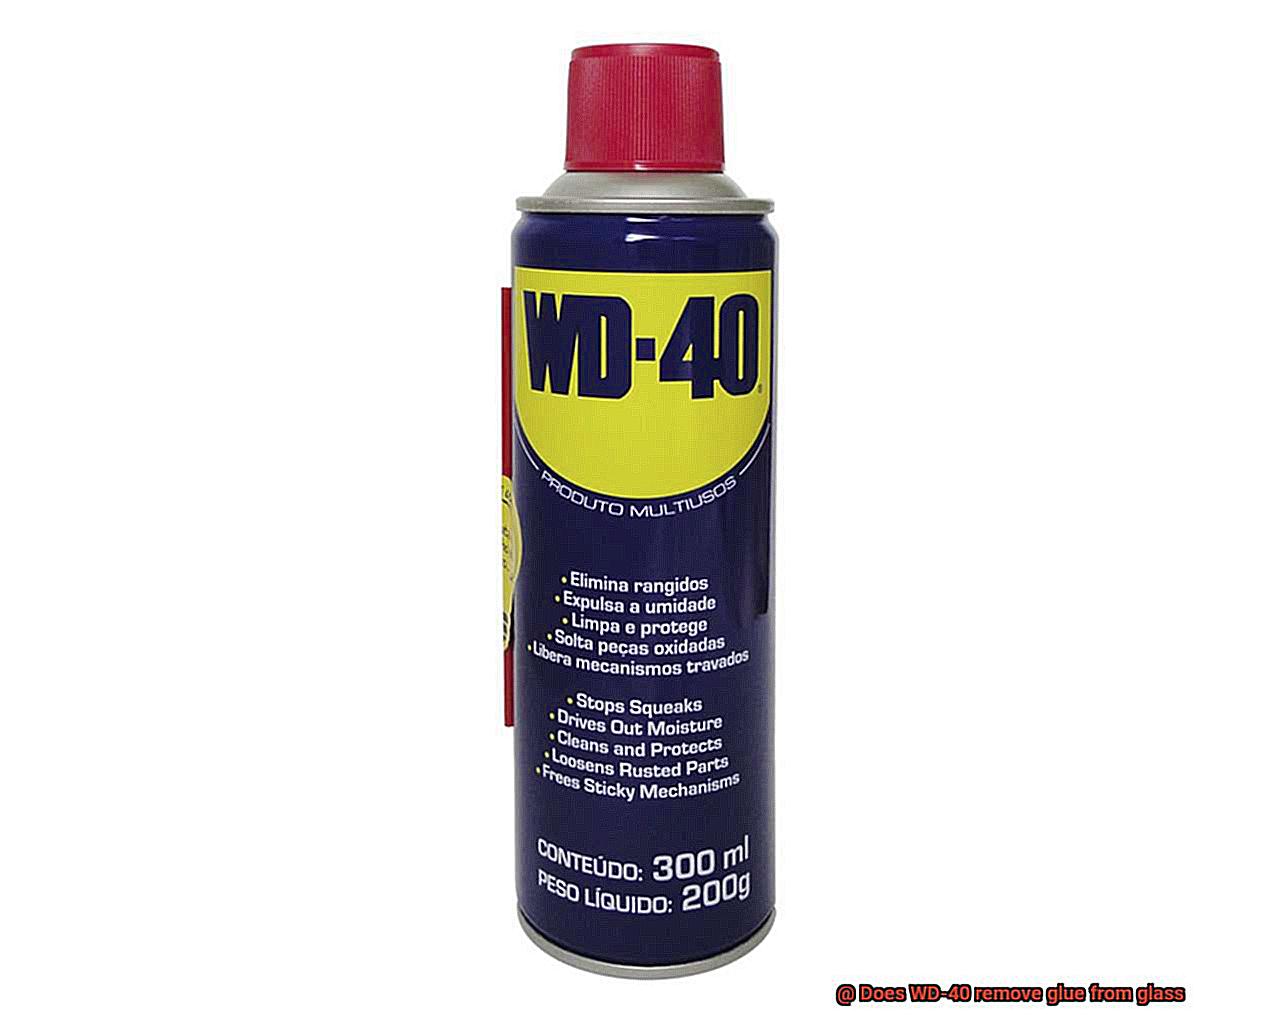 Does WD-40 remove glue from glass-3